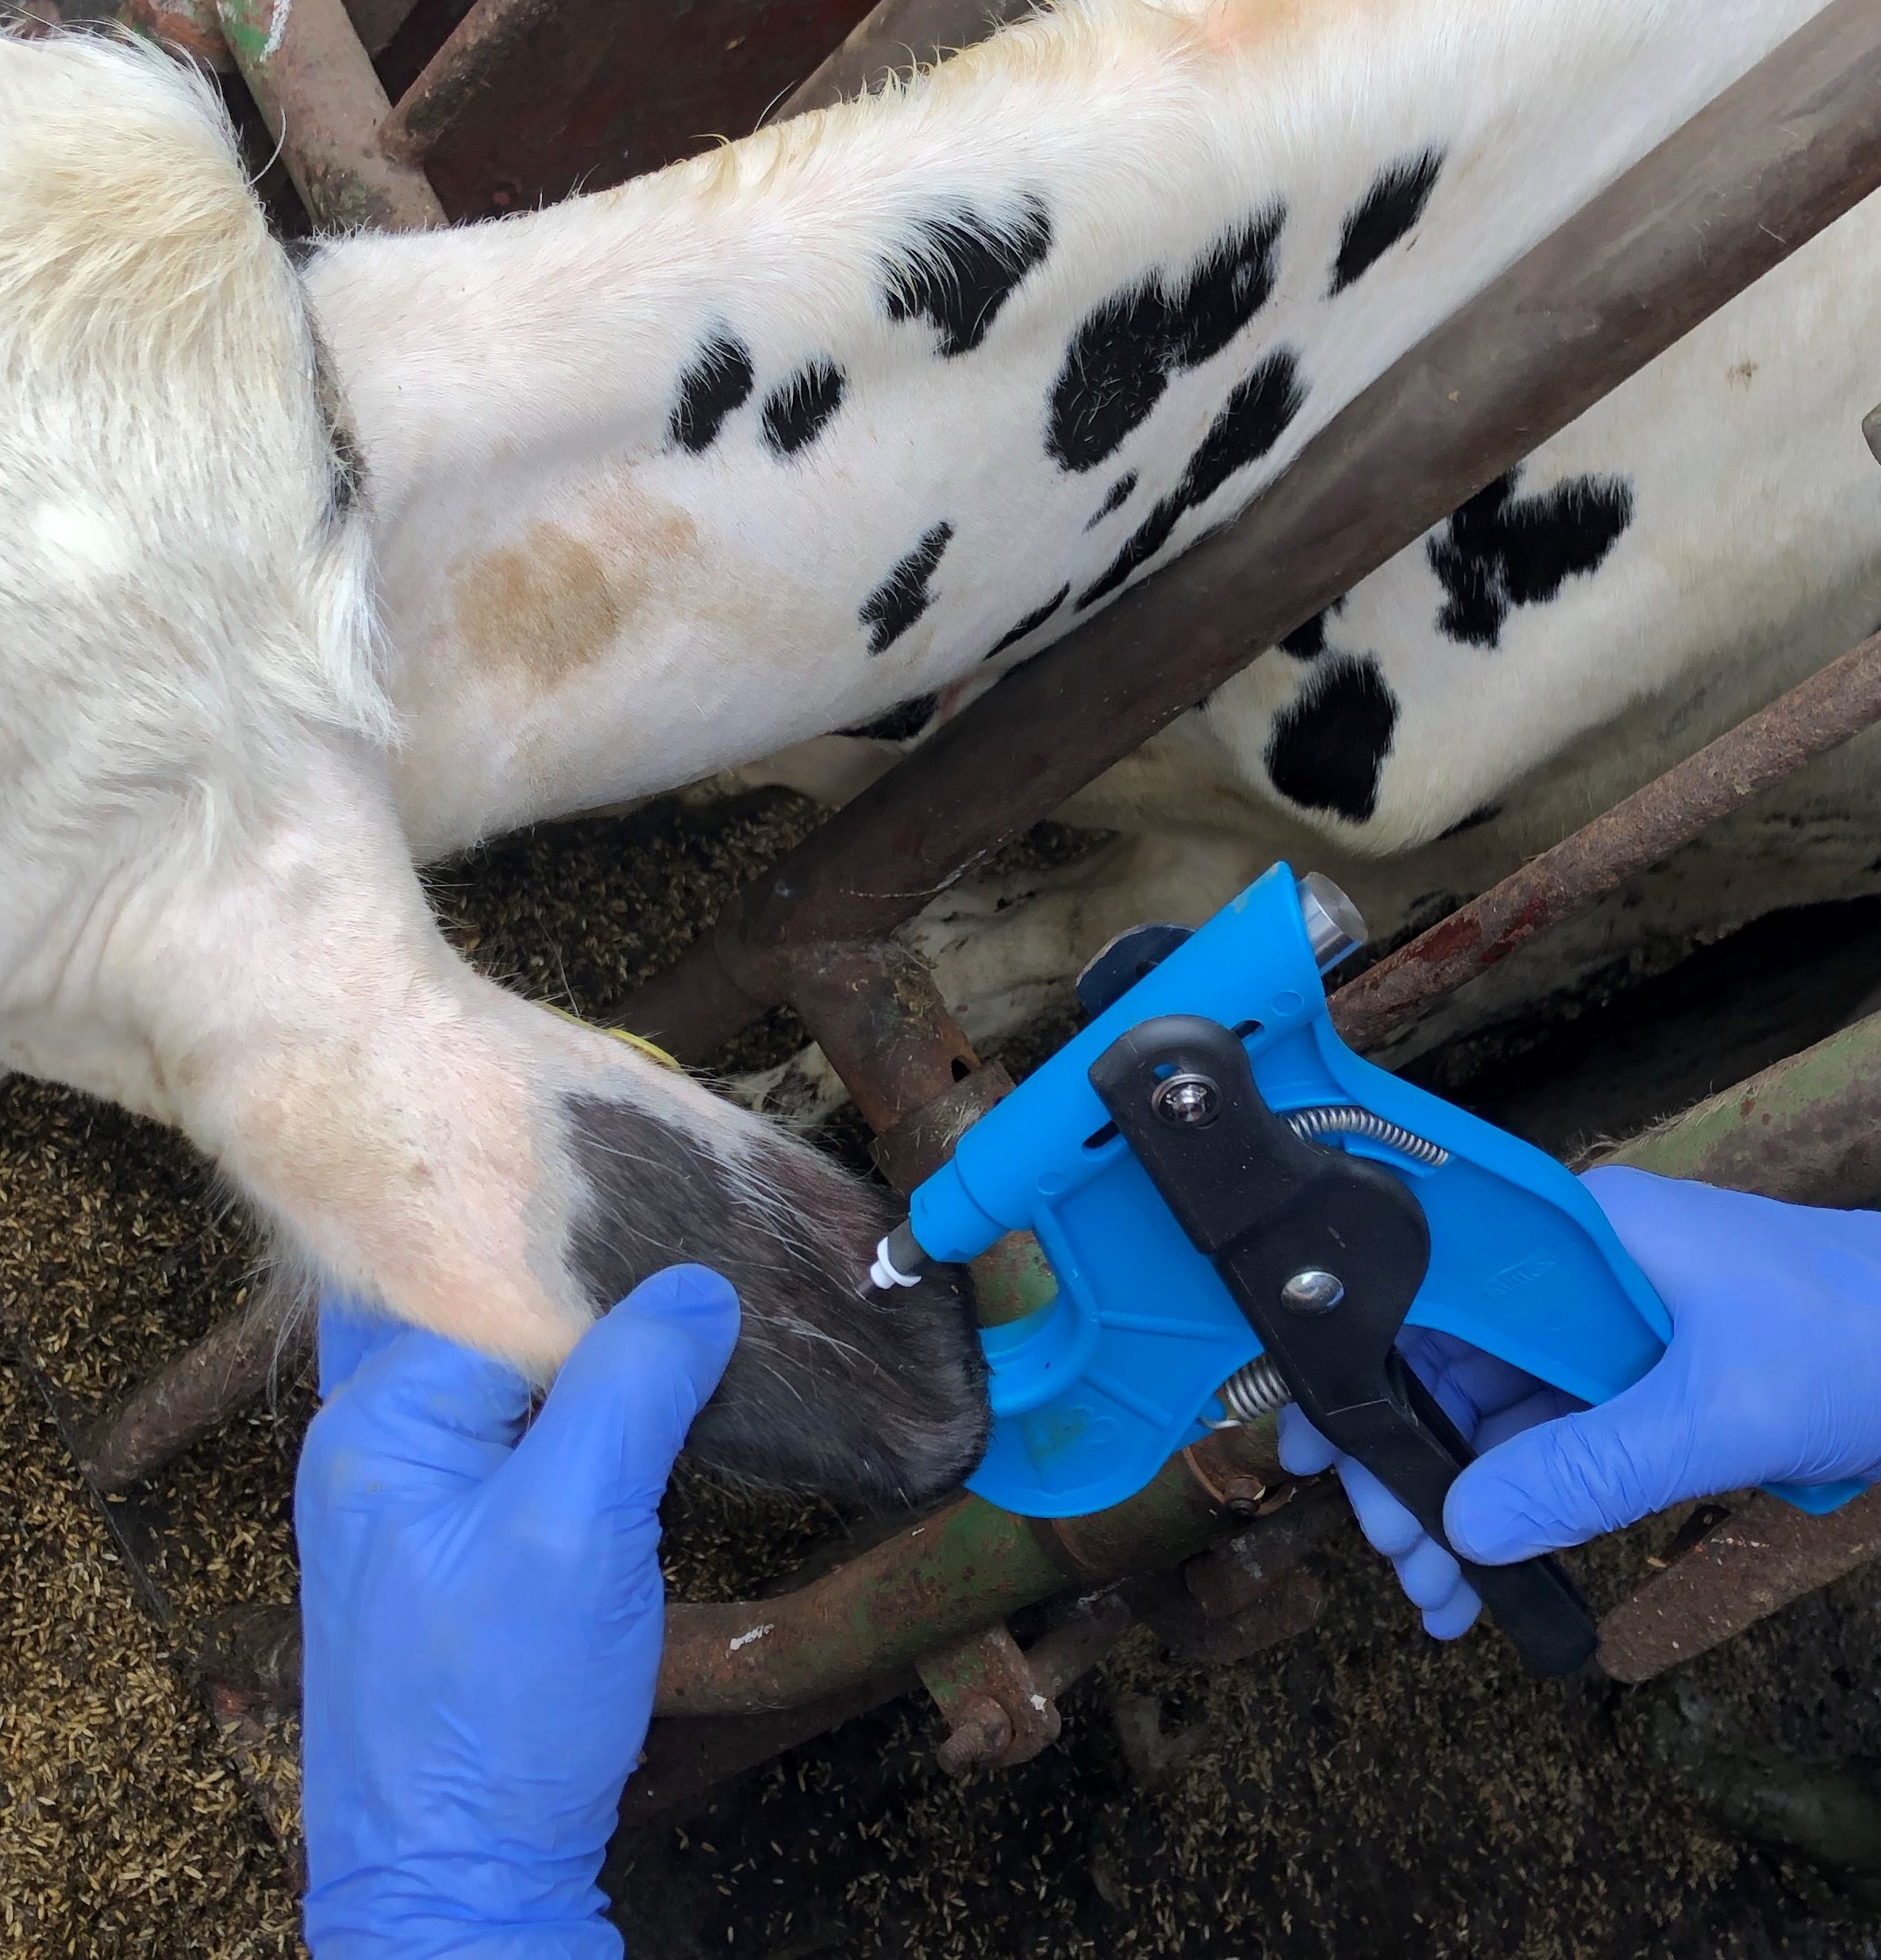 A heifer being genomic tested by taking a sample of DNA from the ear